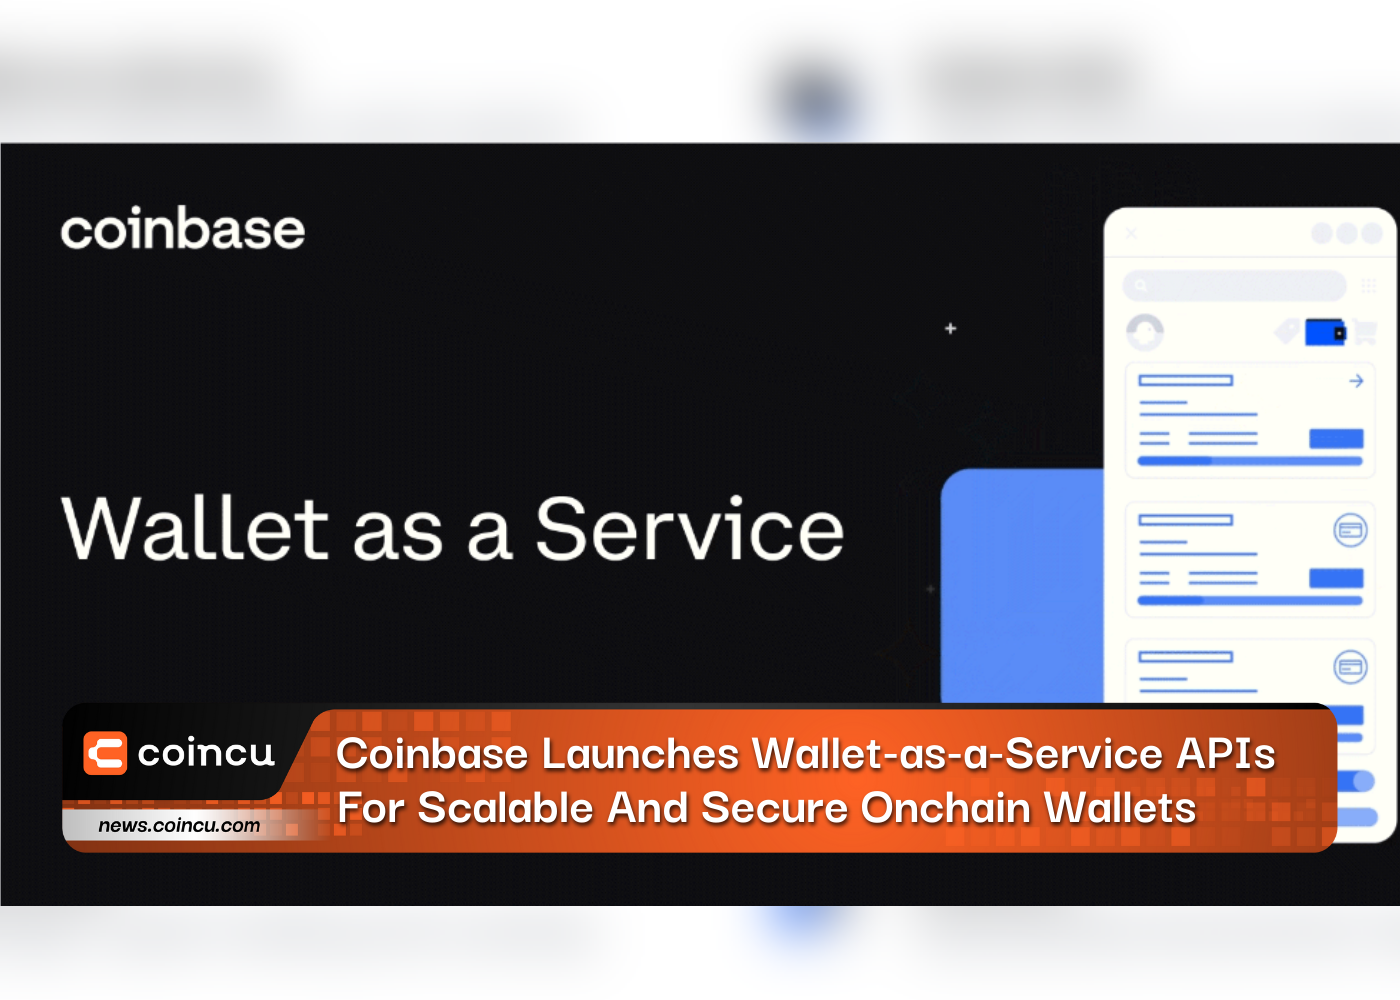 Coinbase Launches Wallet-as-a-Service APIs For Scalable And Secure Onchain Wallets